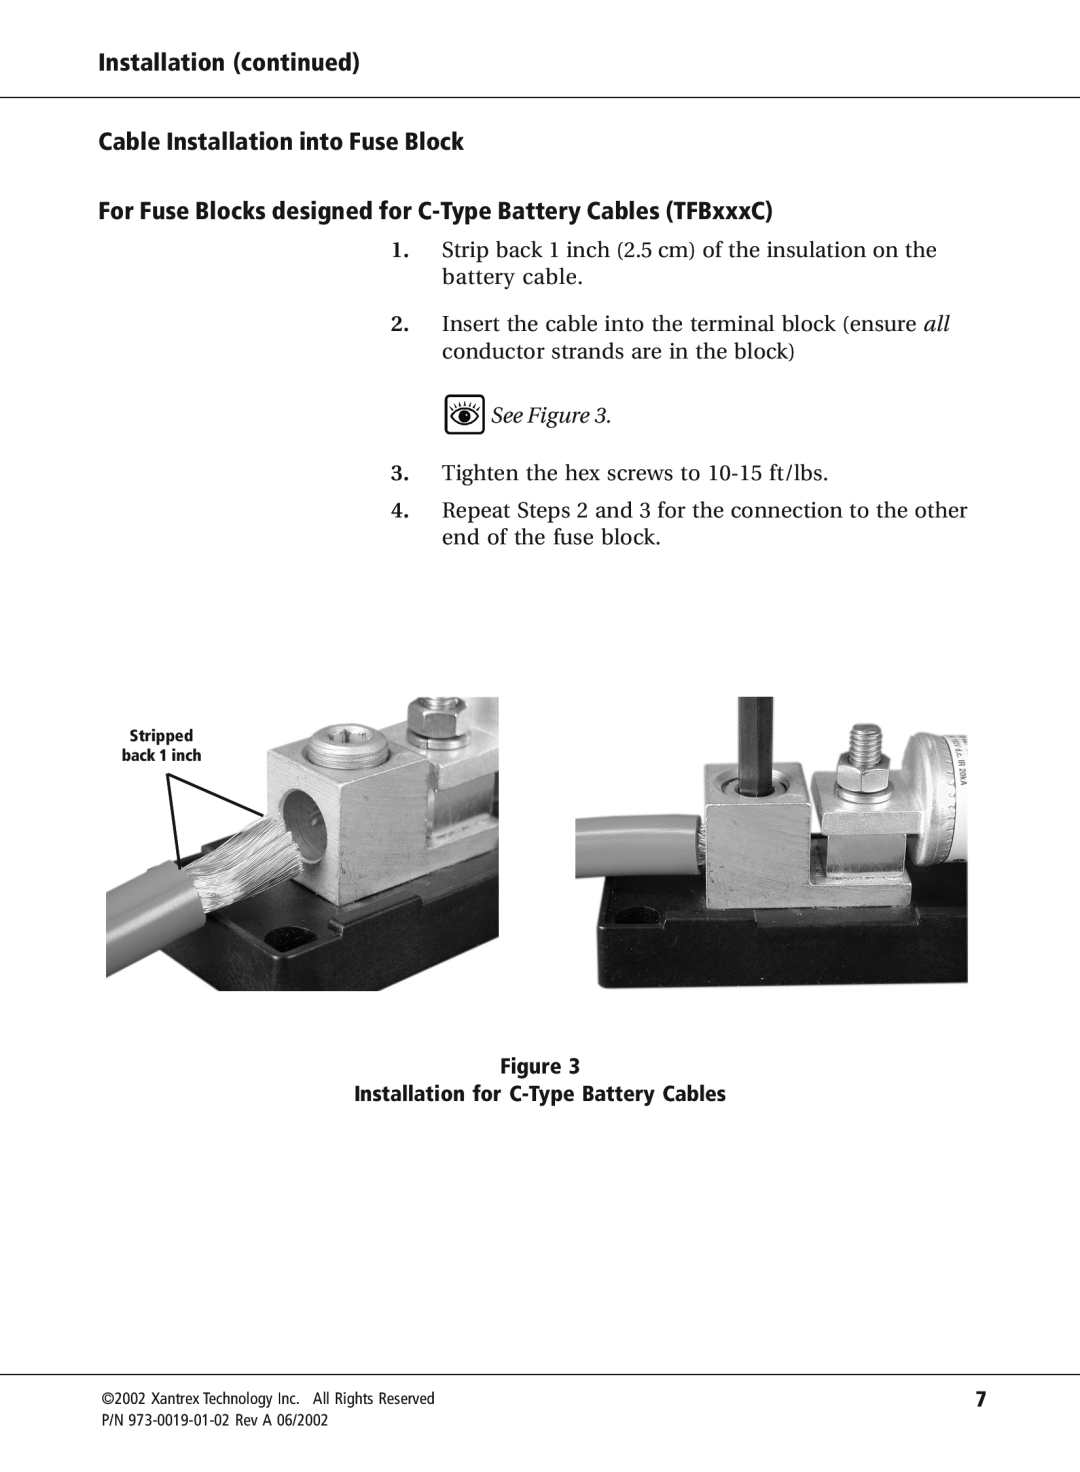 Xantrex Technology TFB400C, TFB350C, TFB300C manual Installation continued Cable Installation into Fuse Block, See Figure 